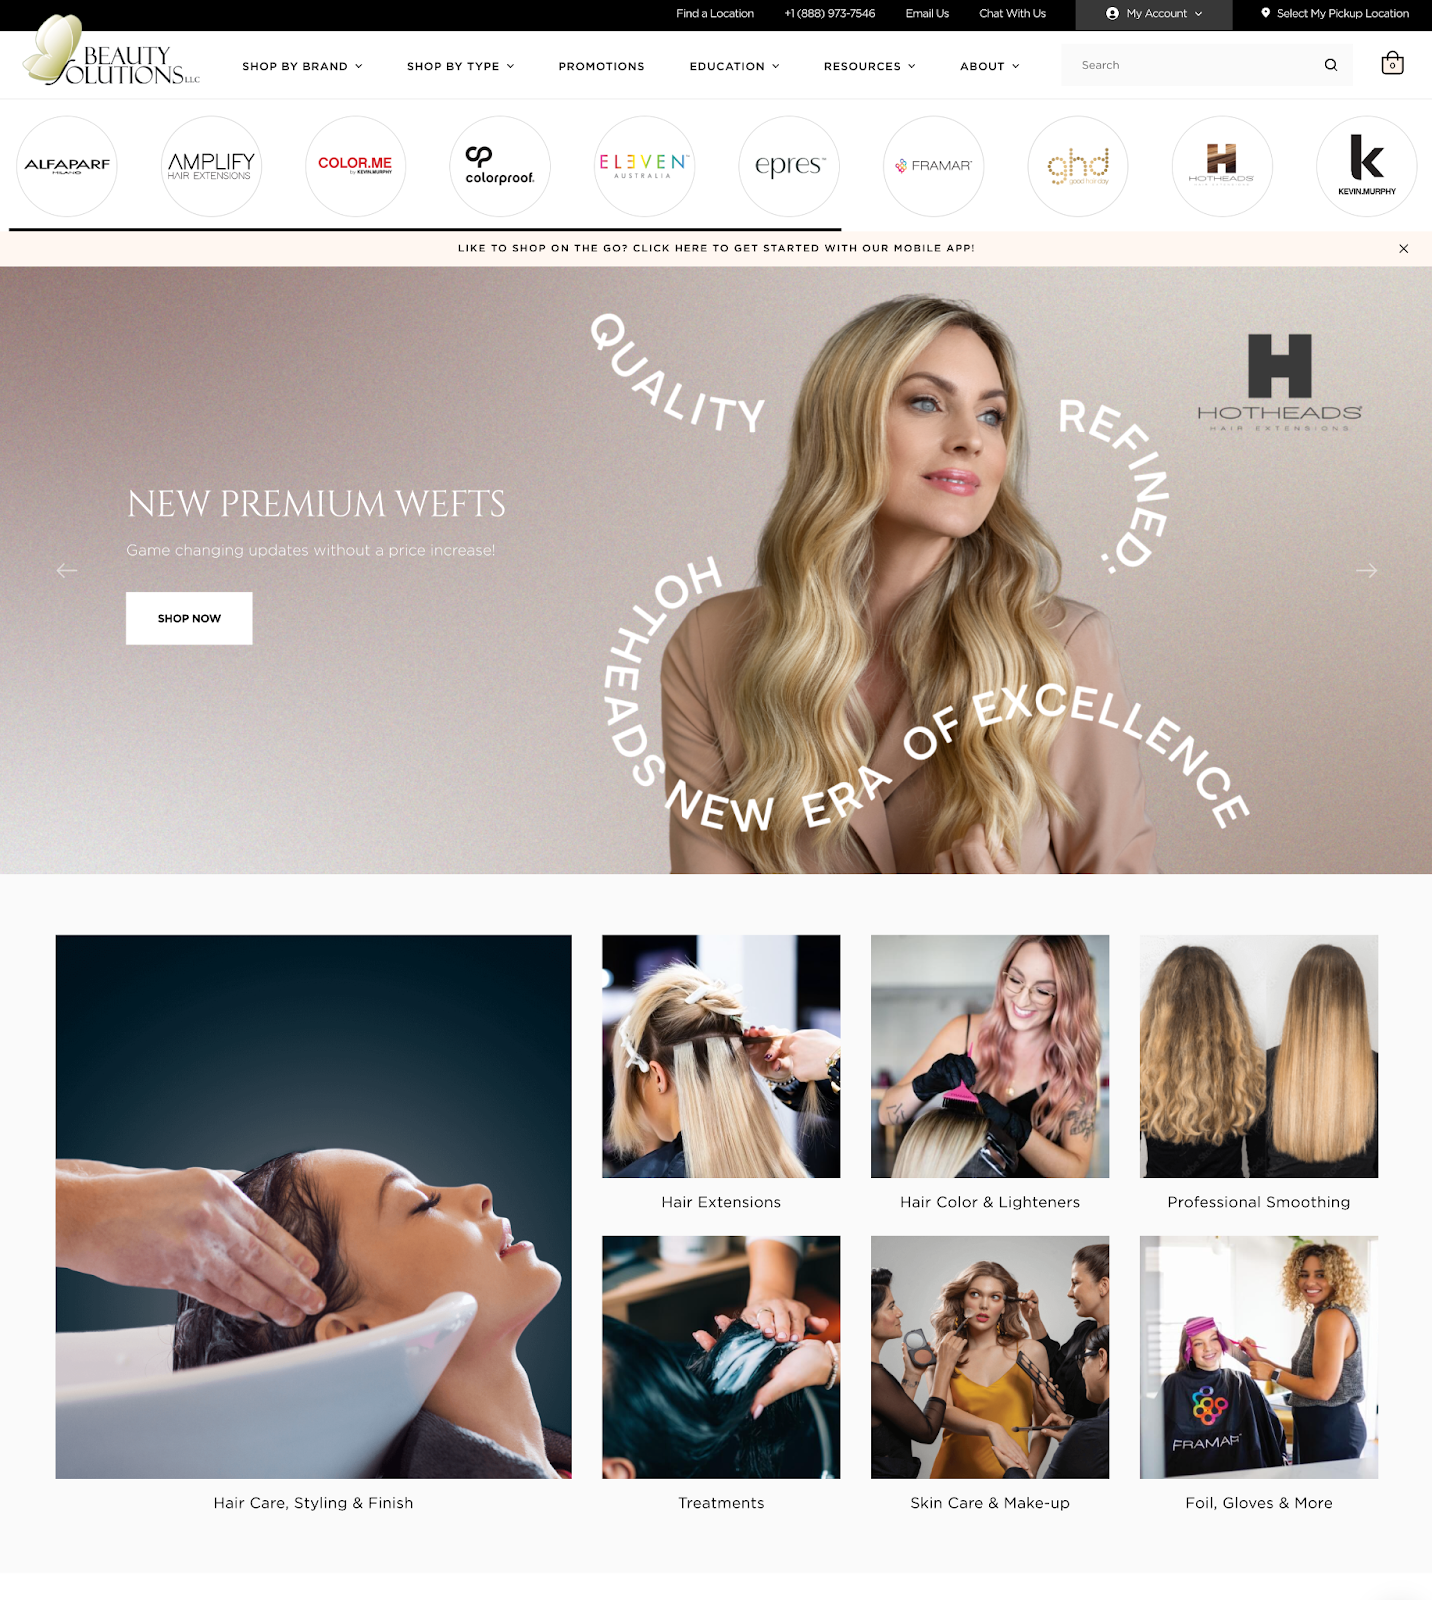 The Beauty Solutions homepage; product promotion in the hero image, product categories in the grid below